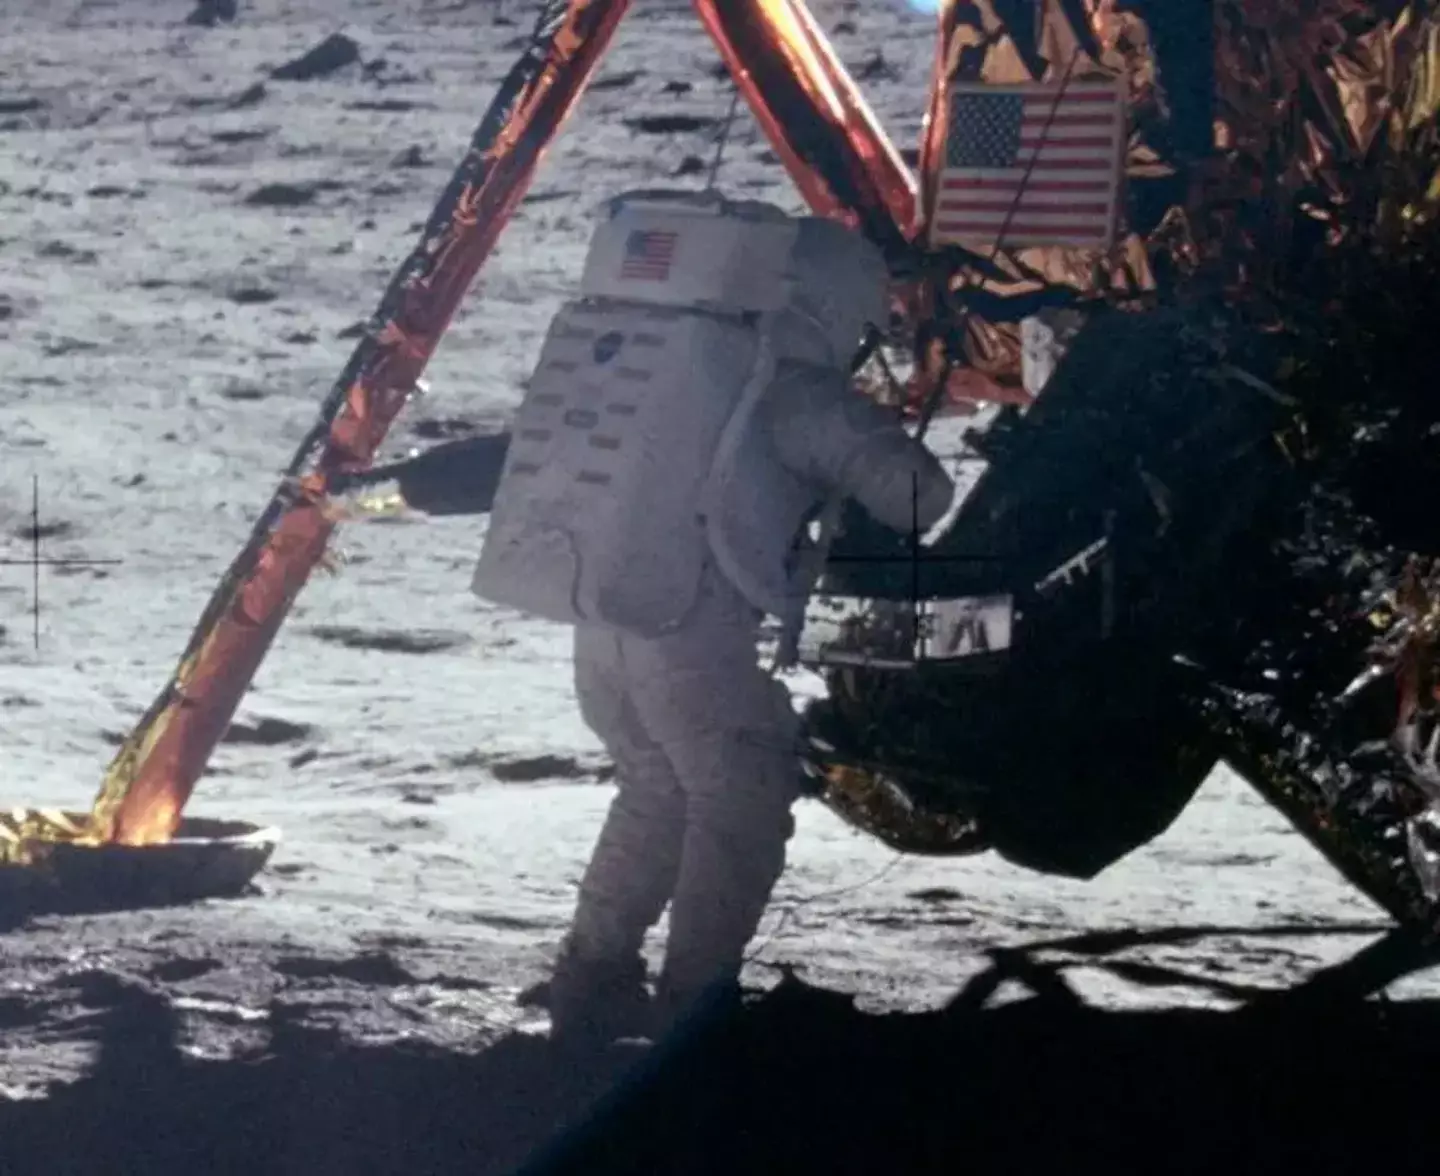 Neil Armstrong was one of the first men to have walked on the Moon.